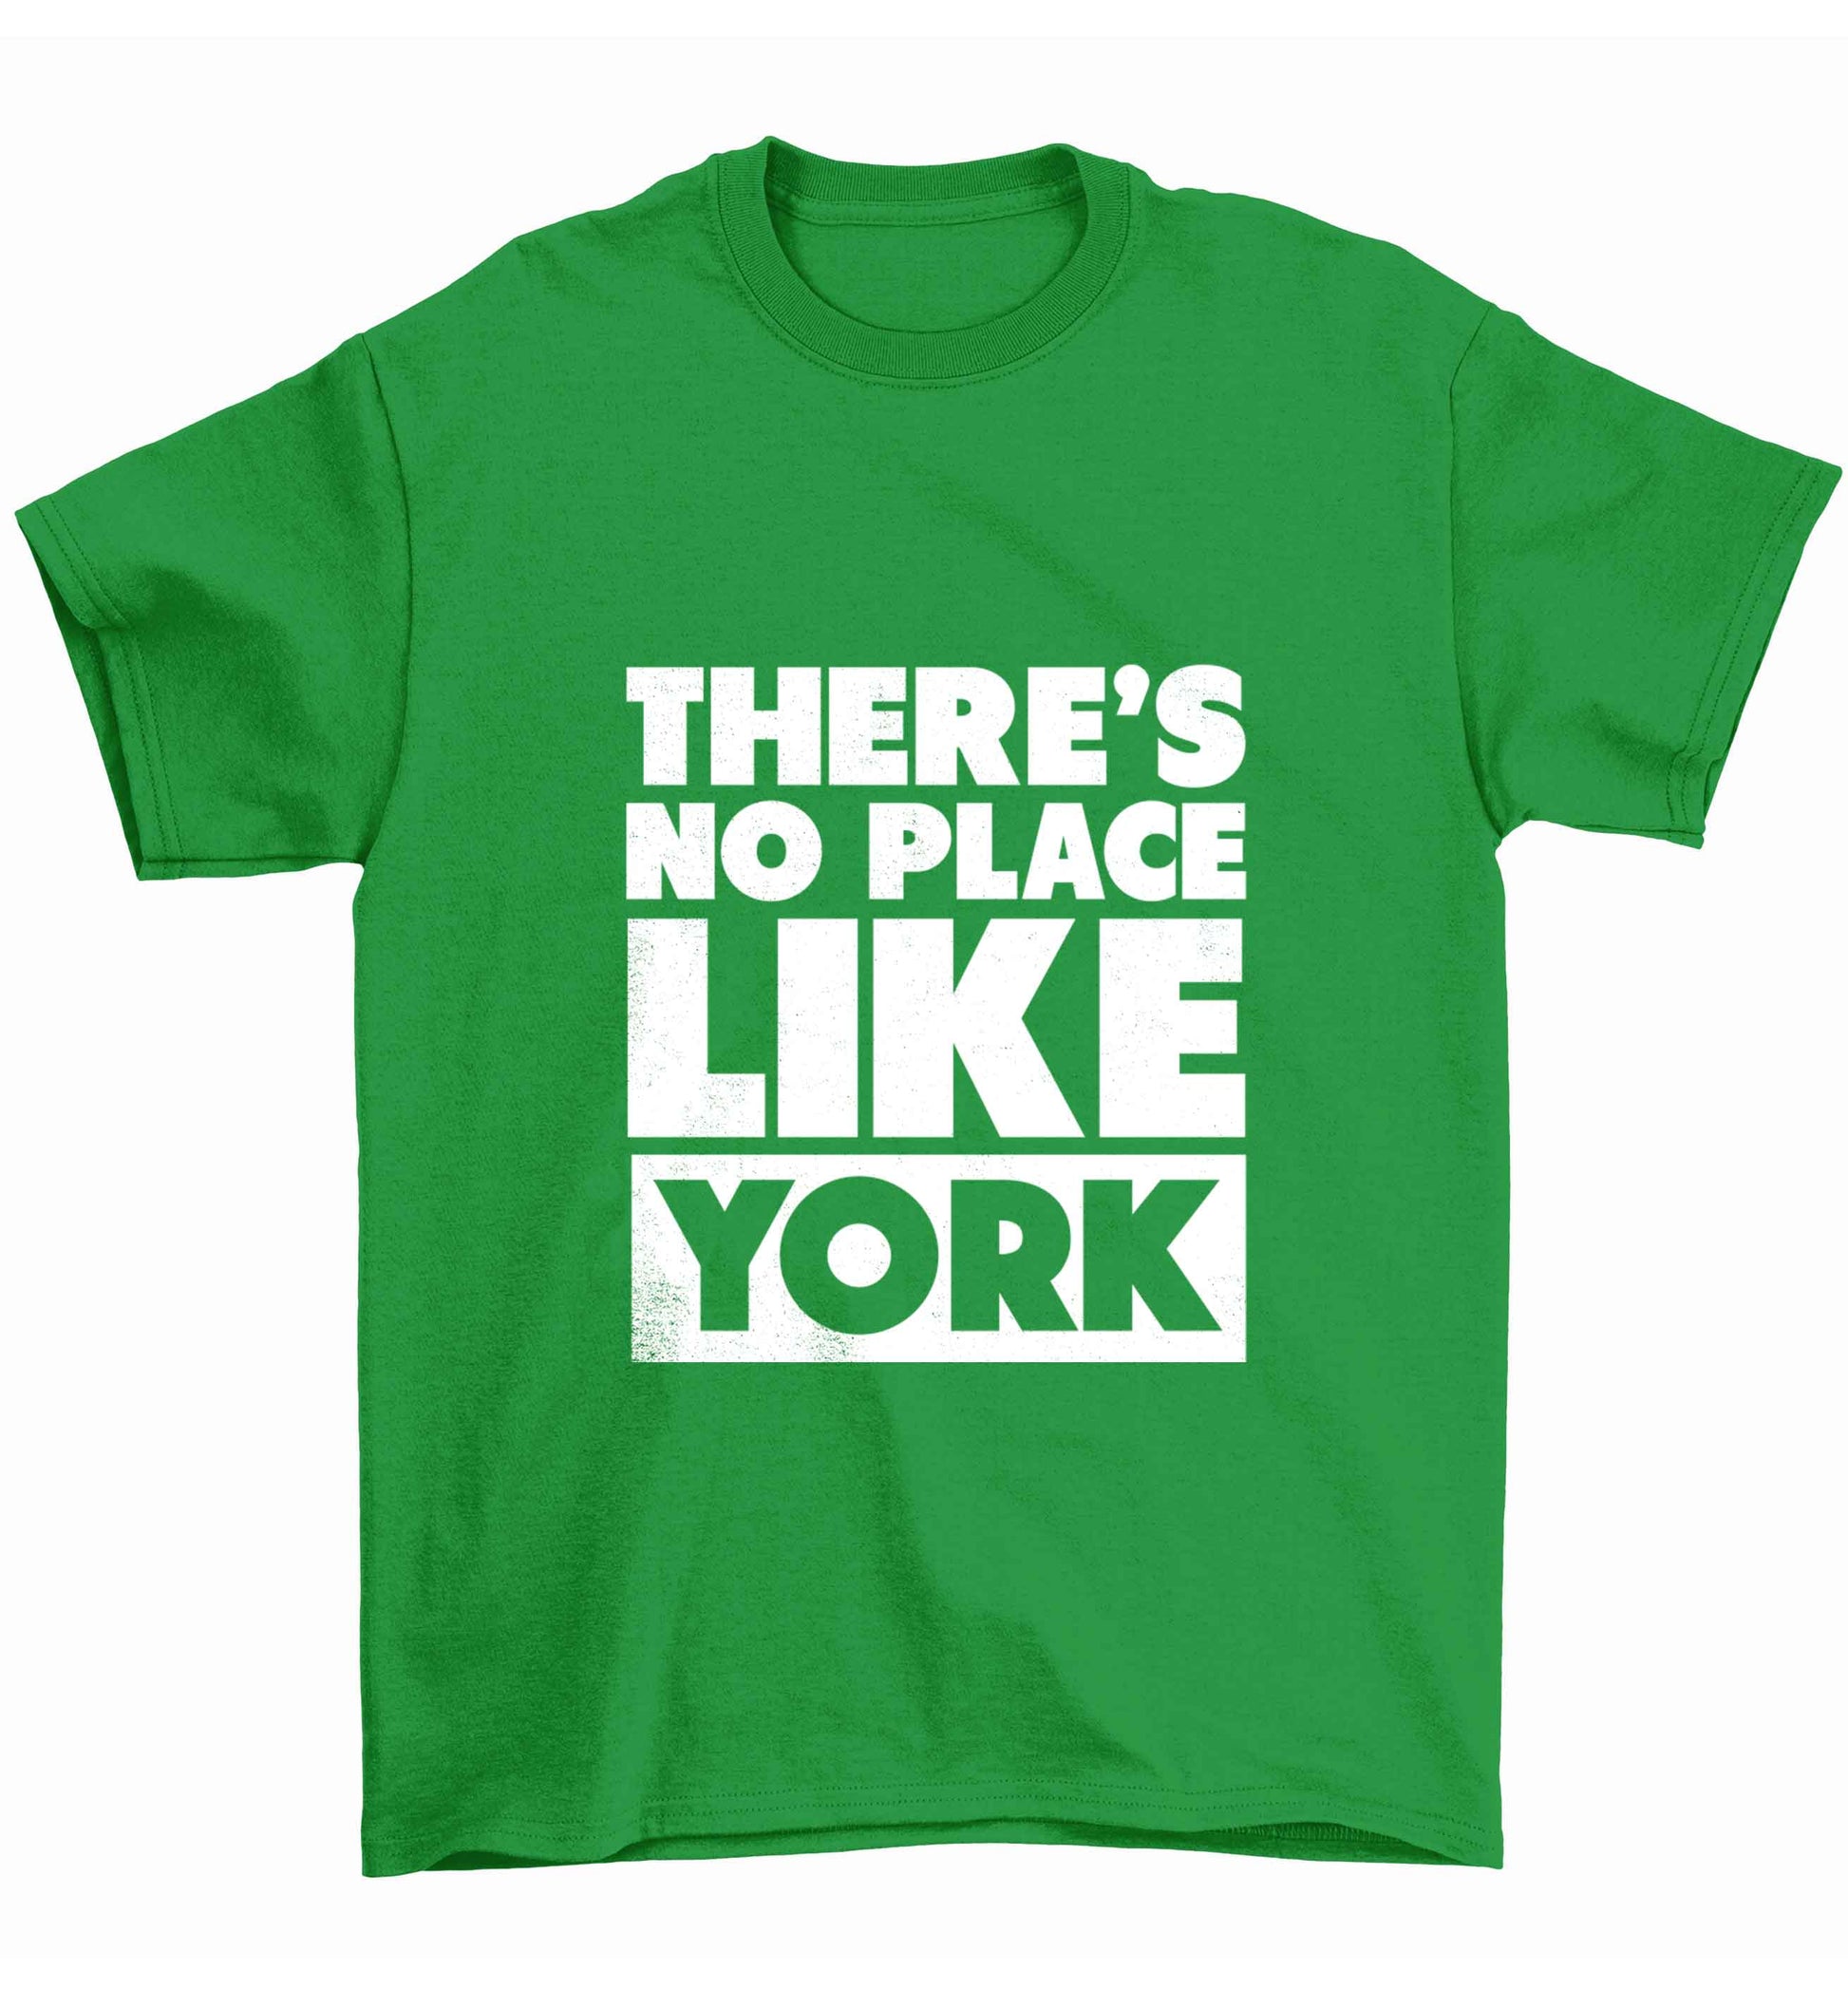 There's no place like york Children's green Tshirt 12-13 Years